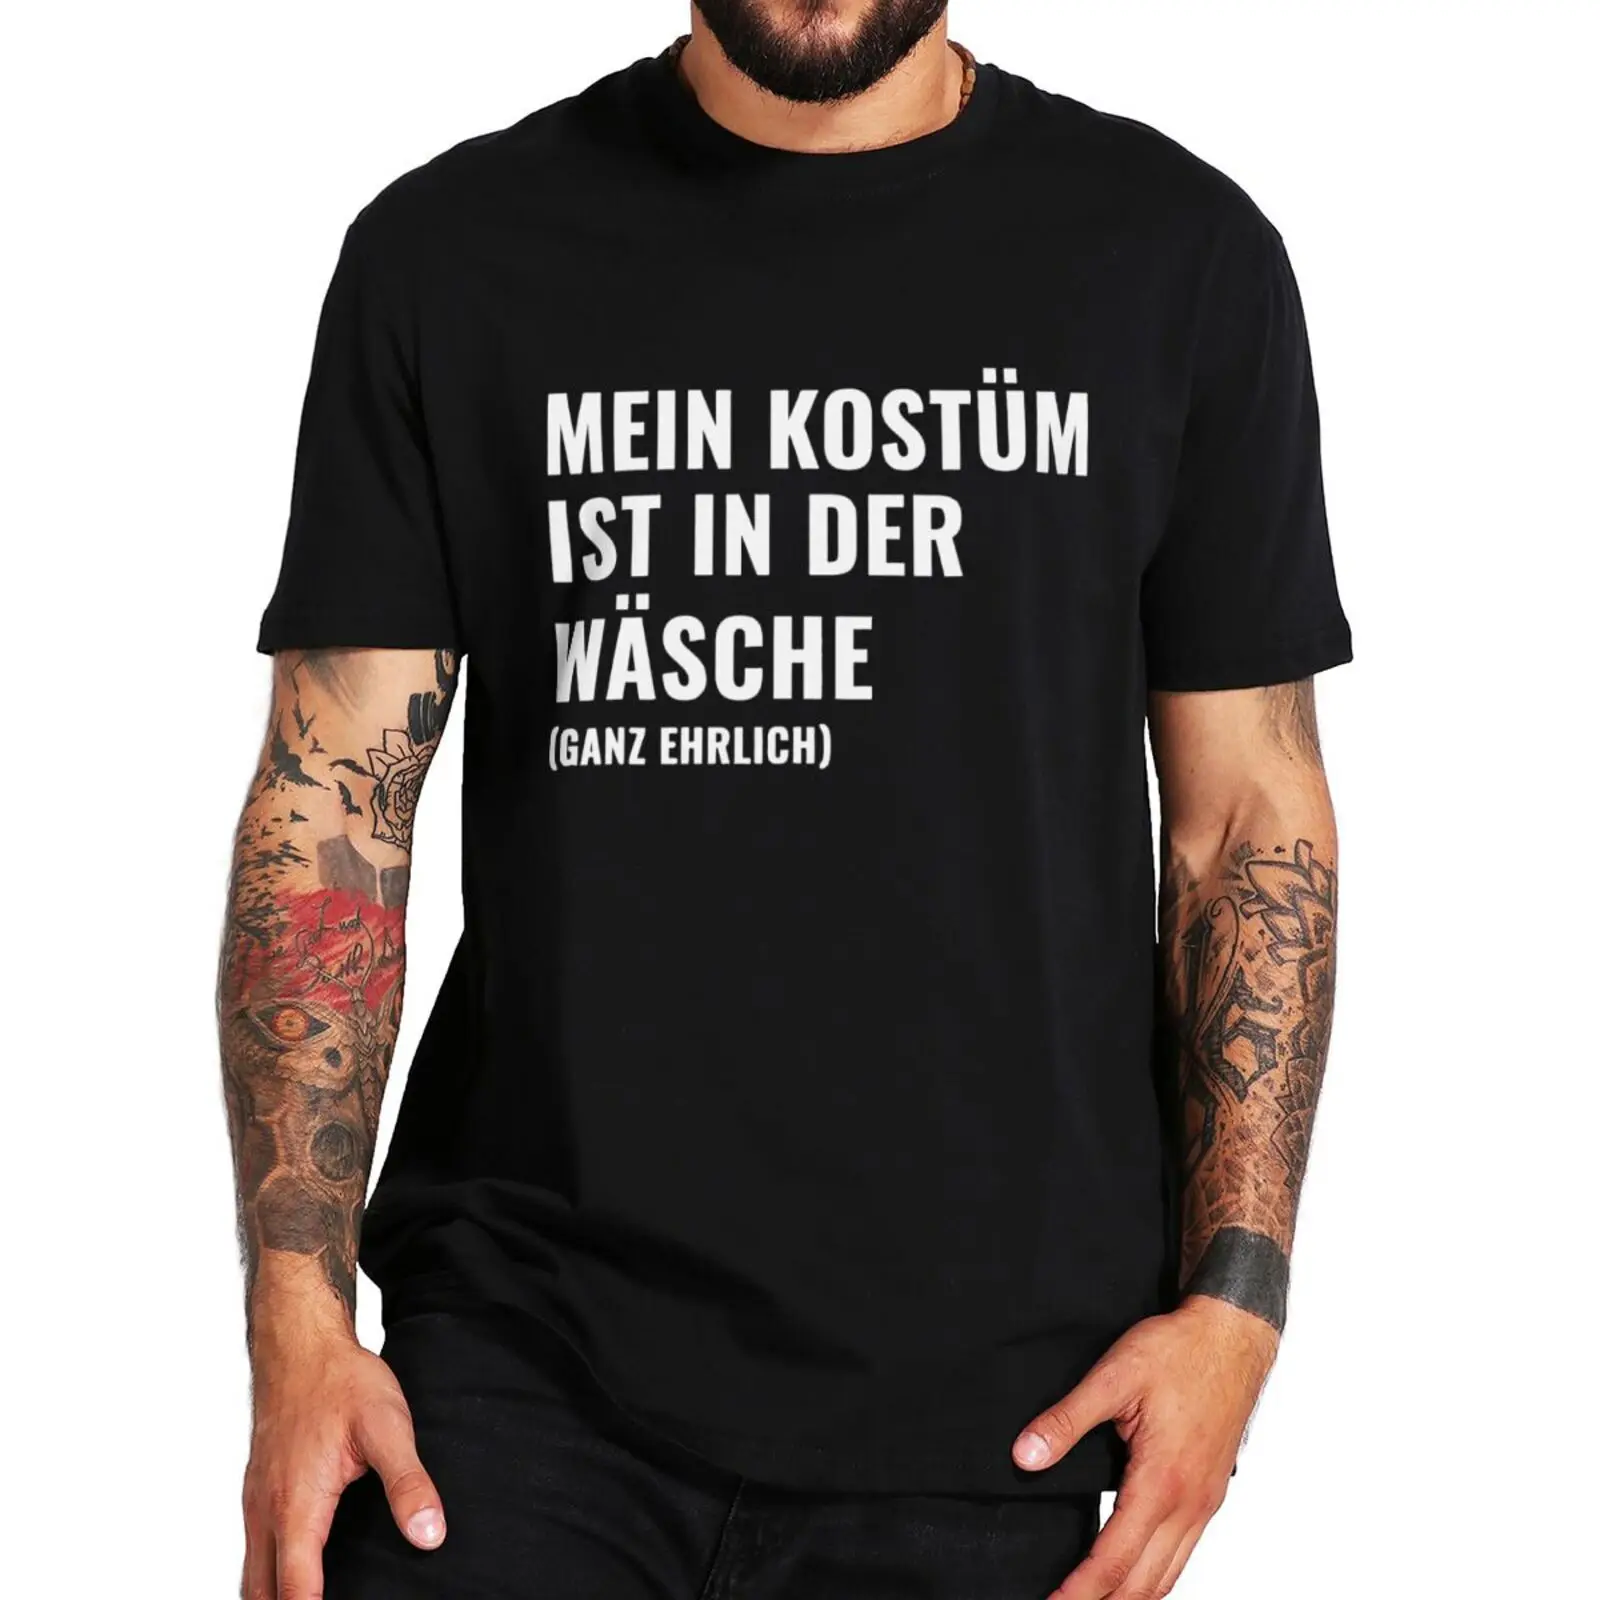 

My Costume Is In The Wash T Shirt Funny German Text Humor Gift Tee Tops EU Size 100% Cotton Unisex Casual Soft Tshirts